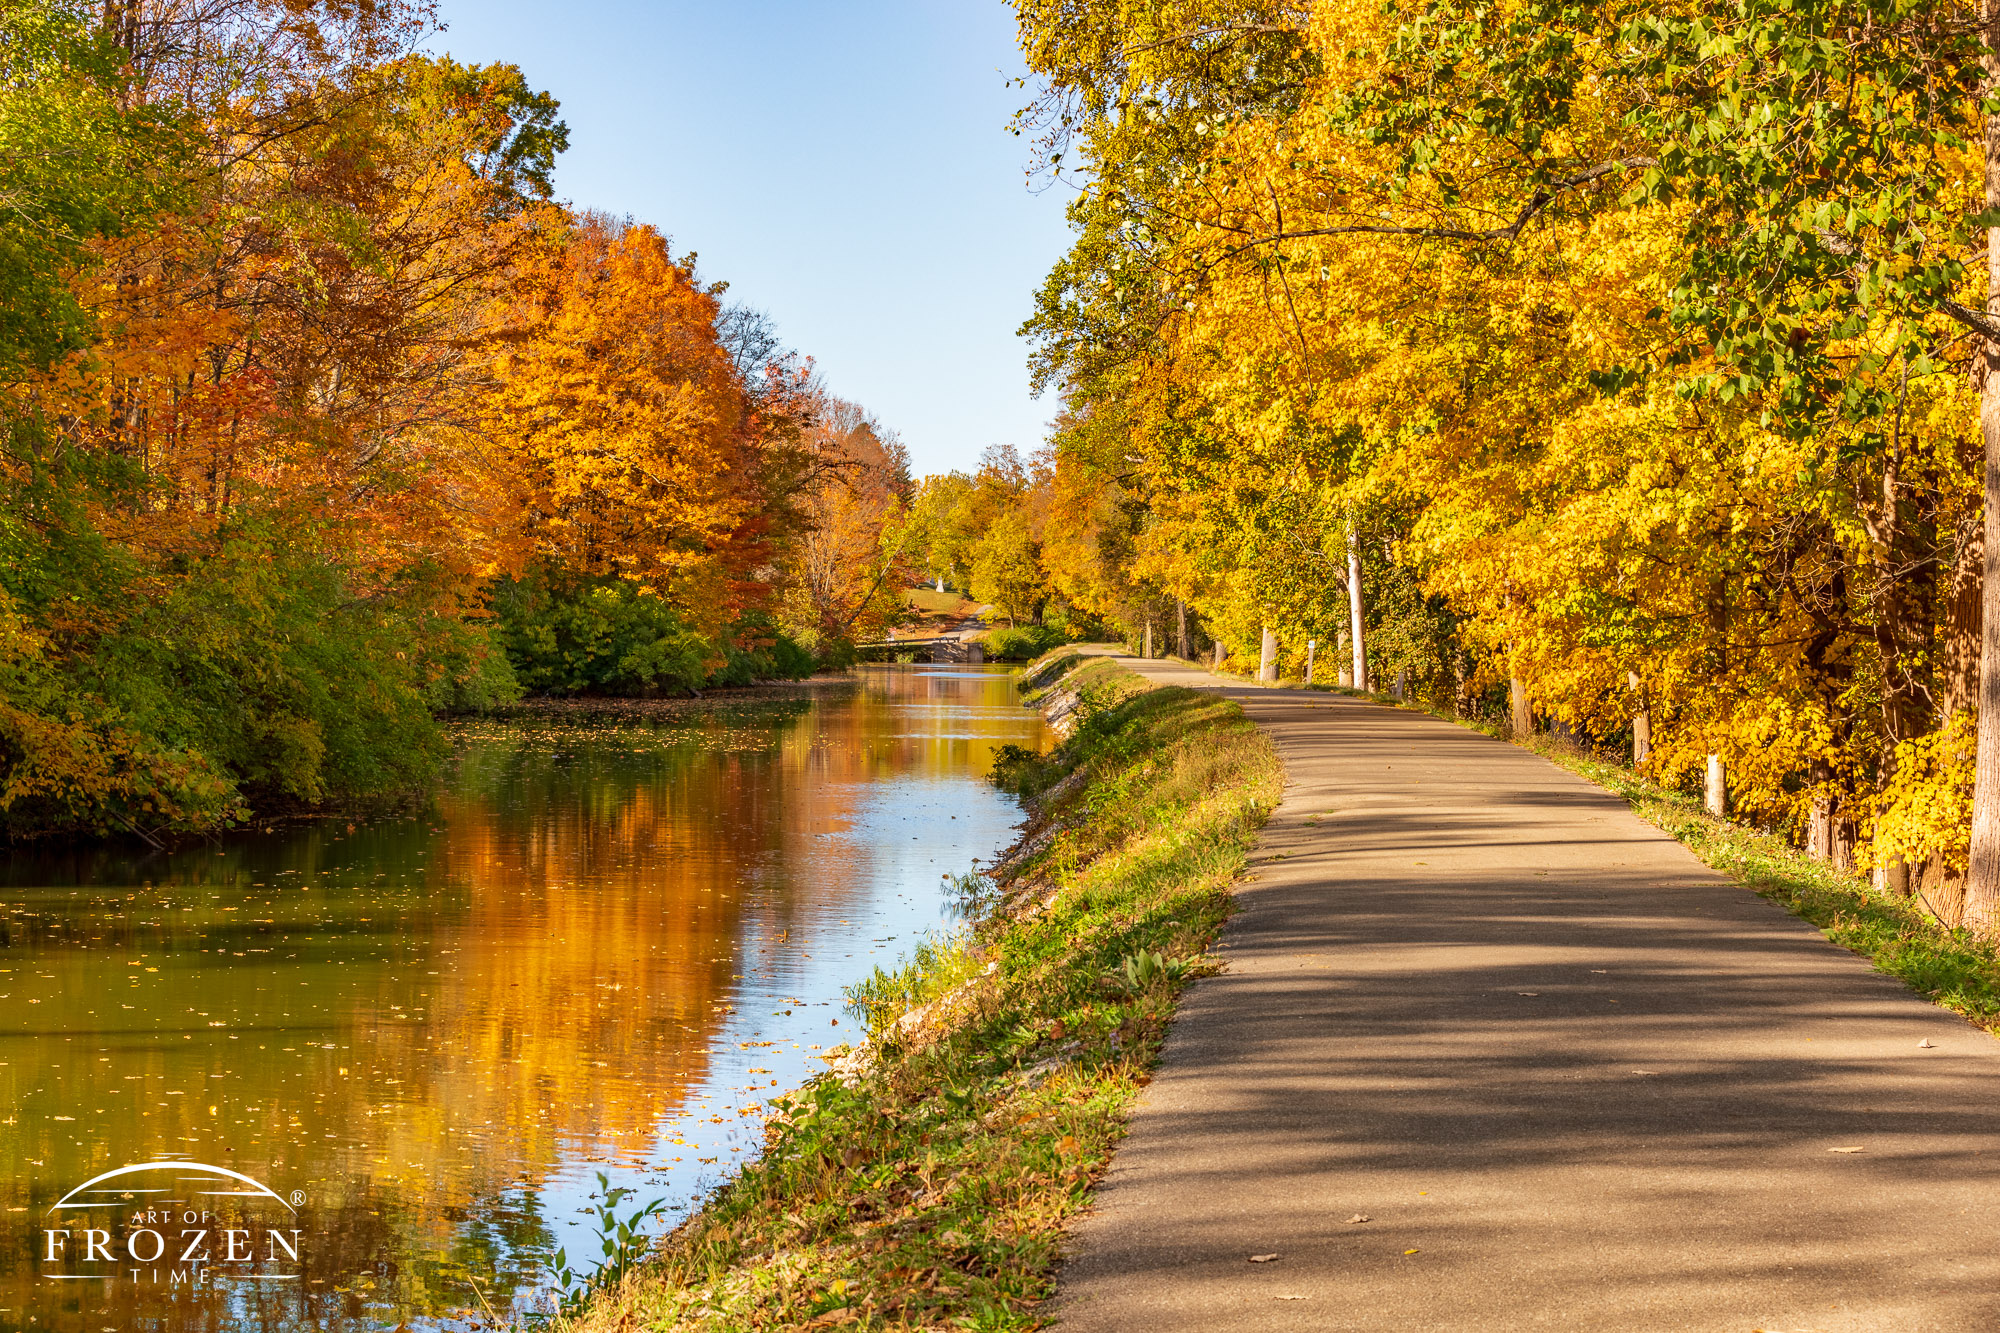 A tree-lined paved trail parallels Piqua Ohio’s Hydraulic Canal Run in autumn where the sun illuminated the autumn-colored leaves